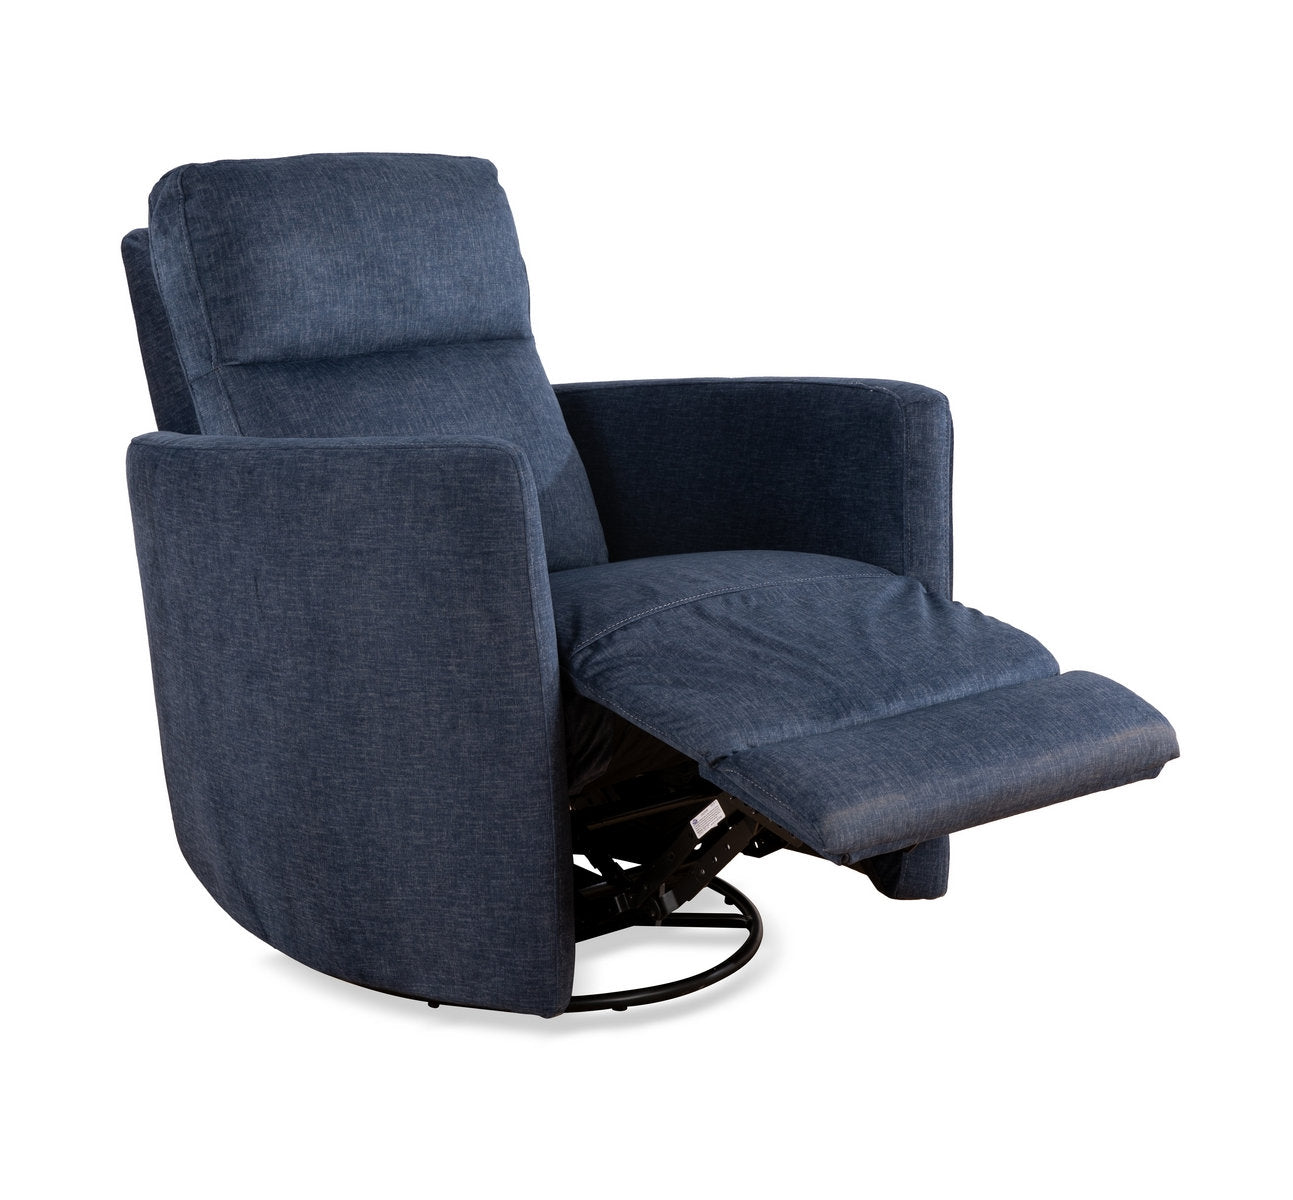 Blue Fabric Manual Recliner Chair with Solid Hardwood Frame